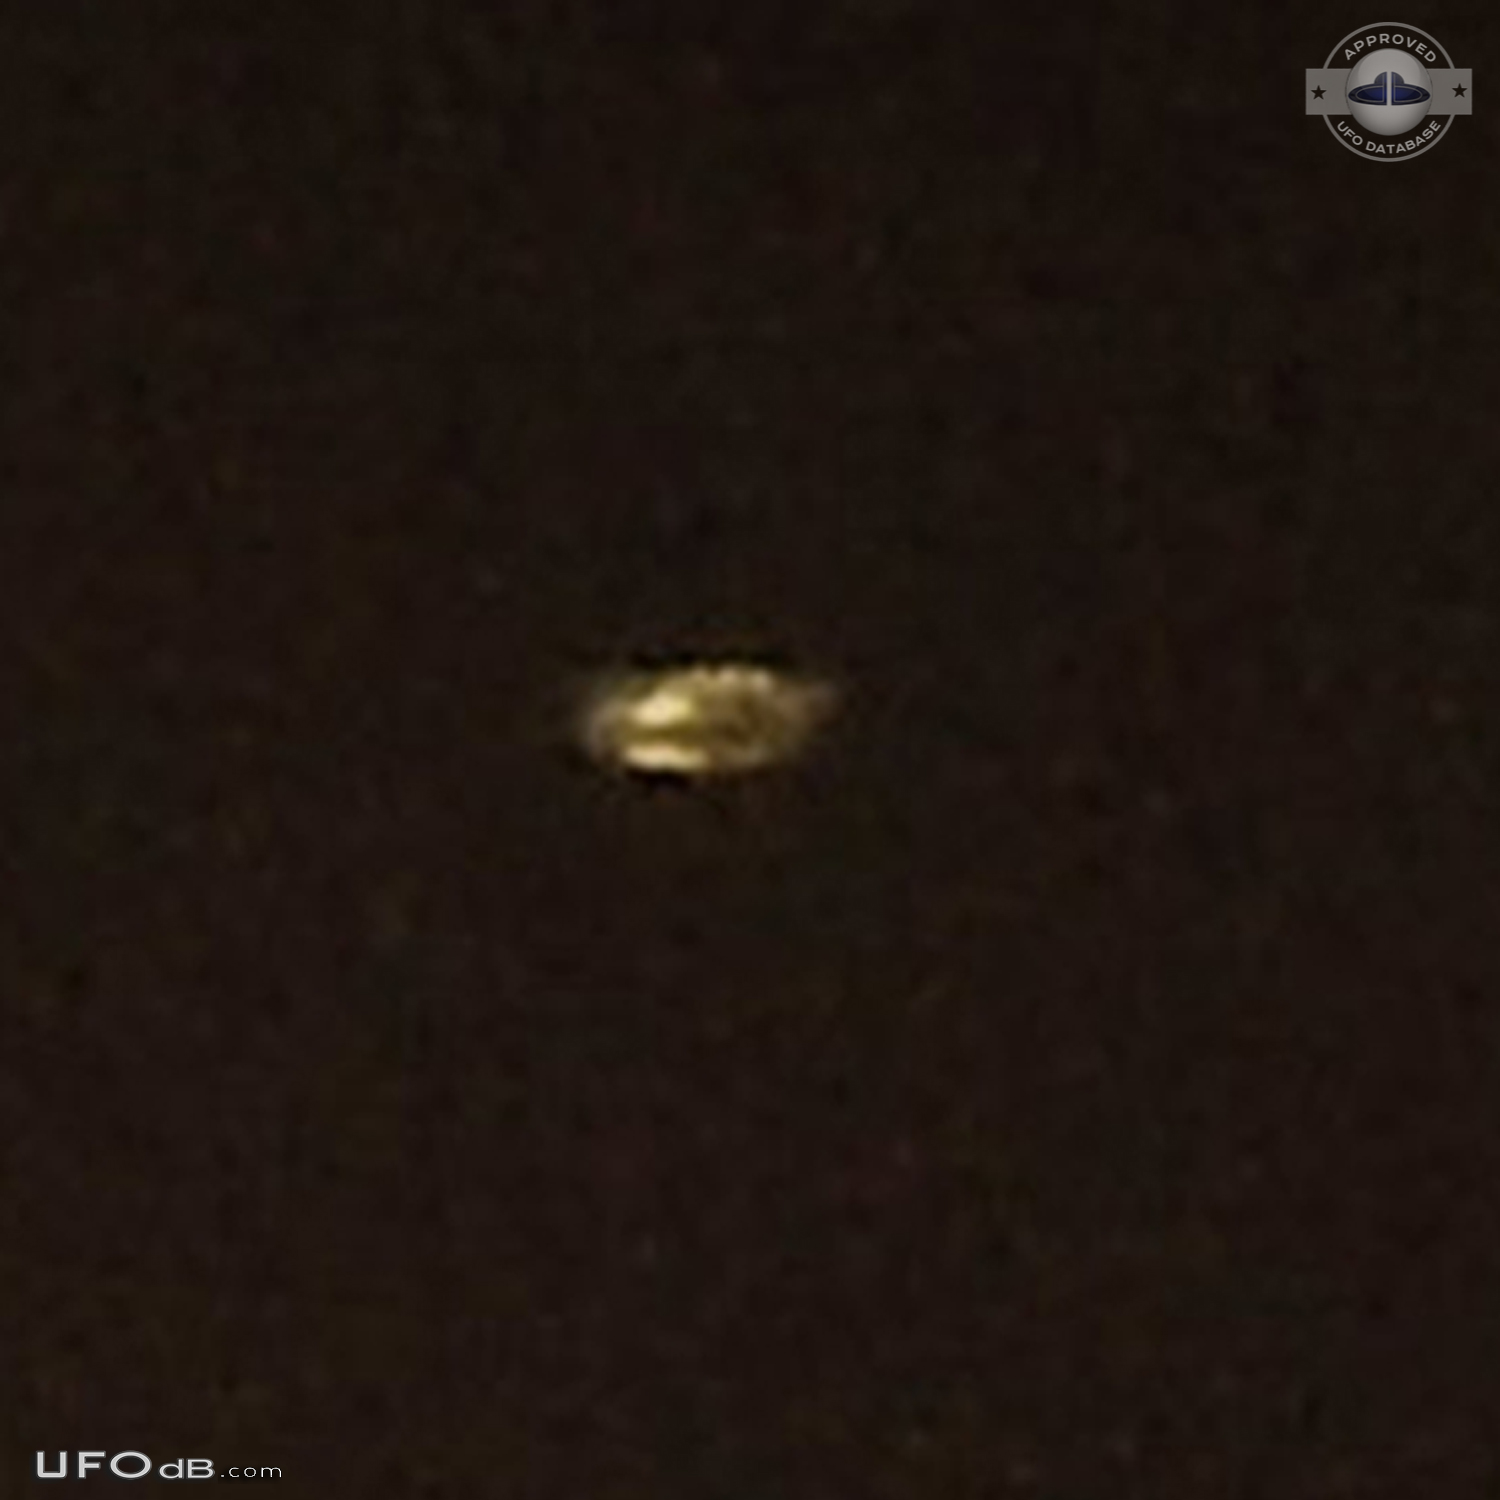 Distance UFO sighting, Appears to be circular shape - Tennessee 2014 UFO Picture #700-3